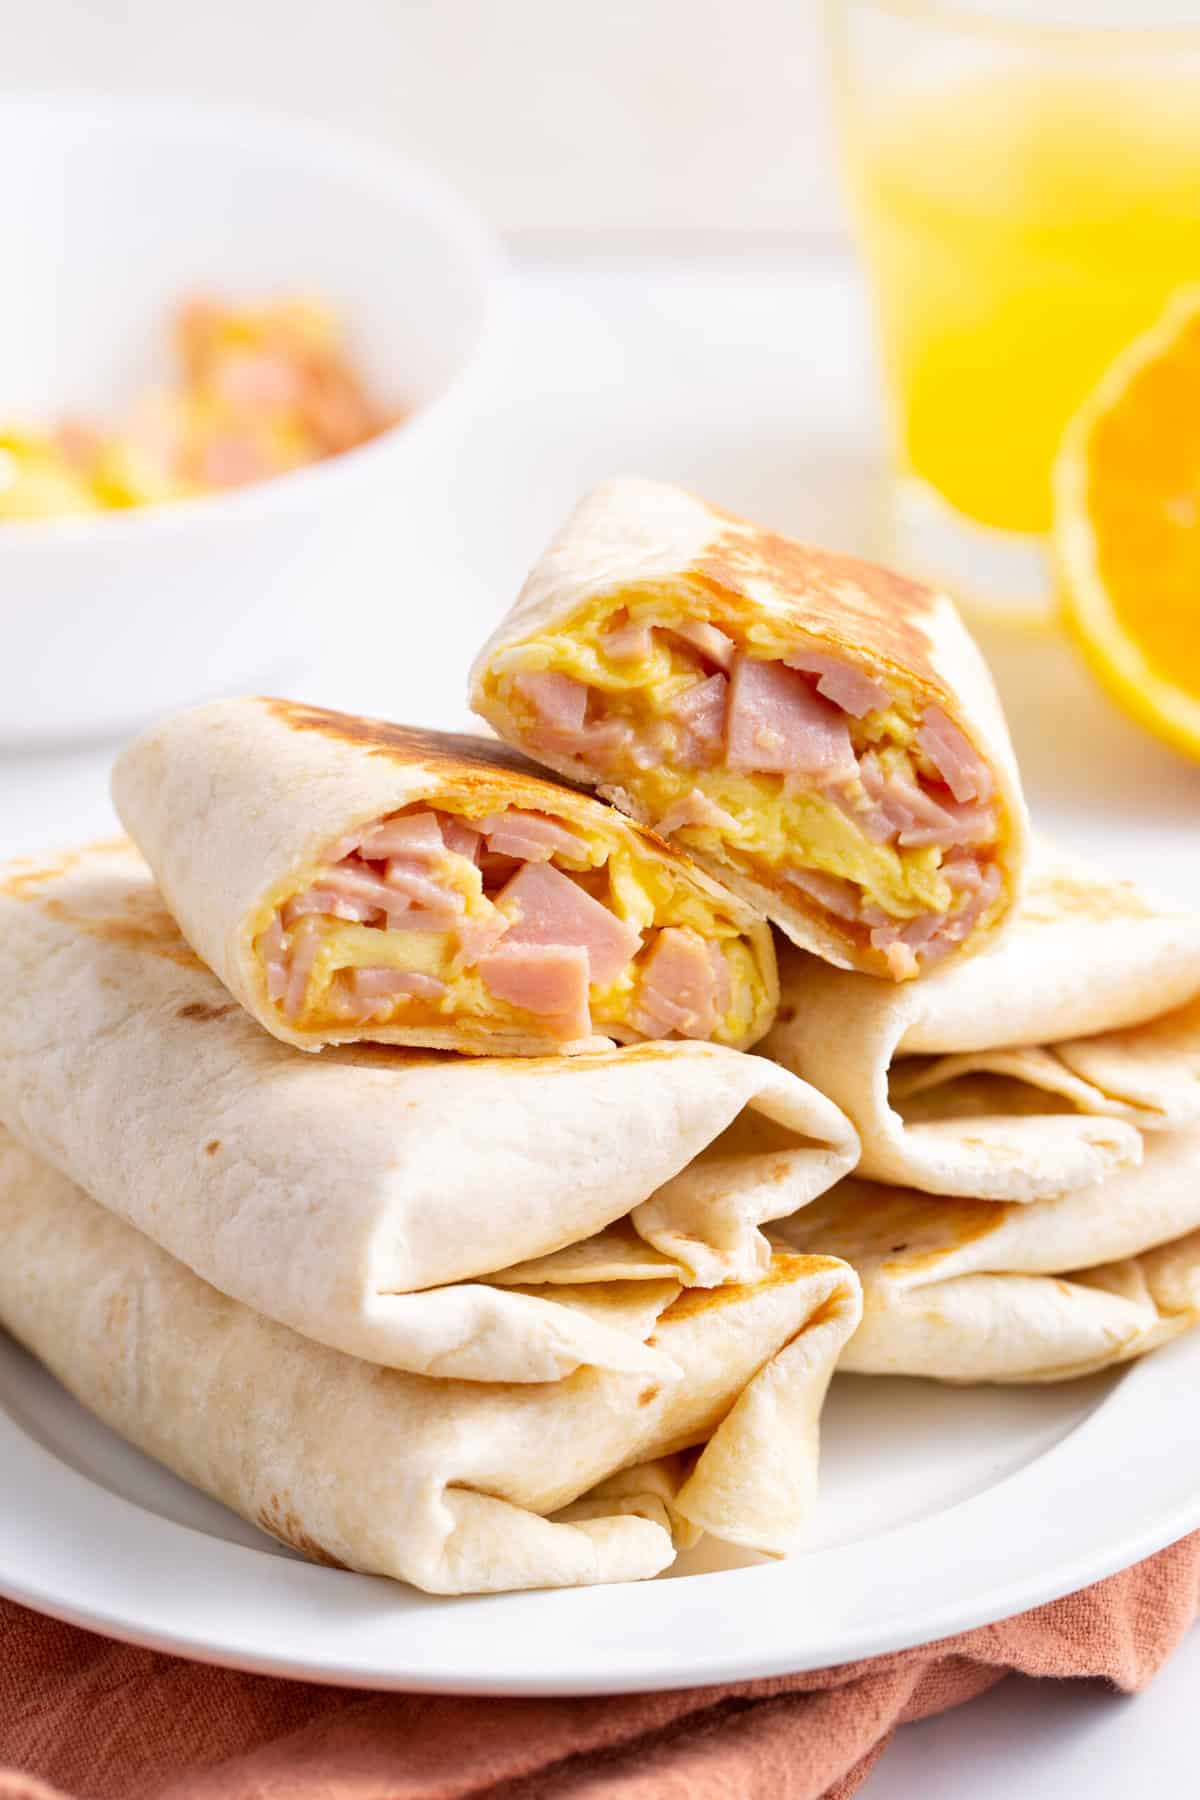 ham and cheese burritos cut in half and stacked on other burritos served on a white round plate.